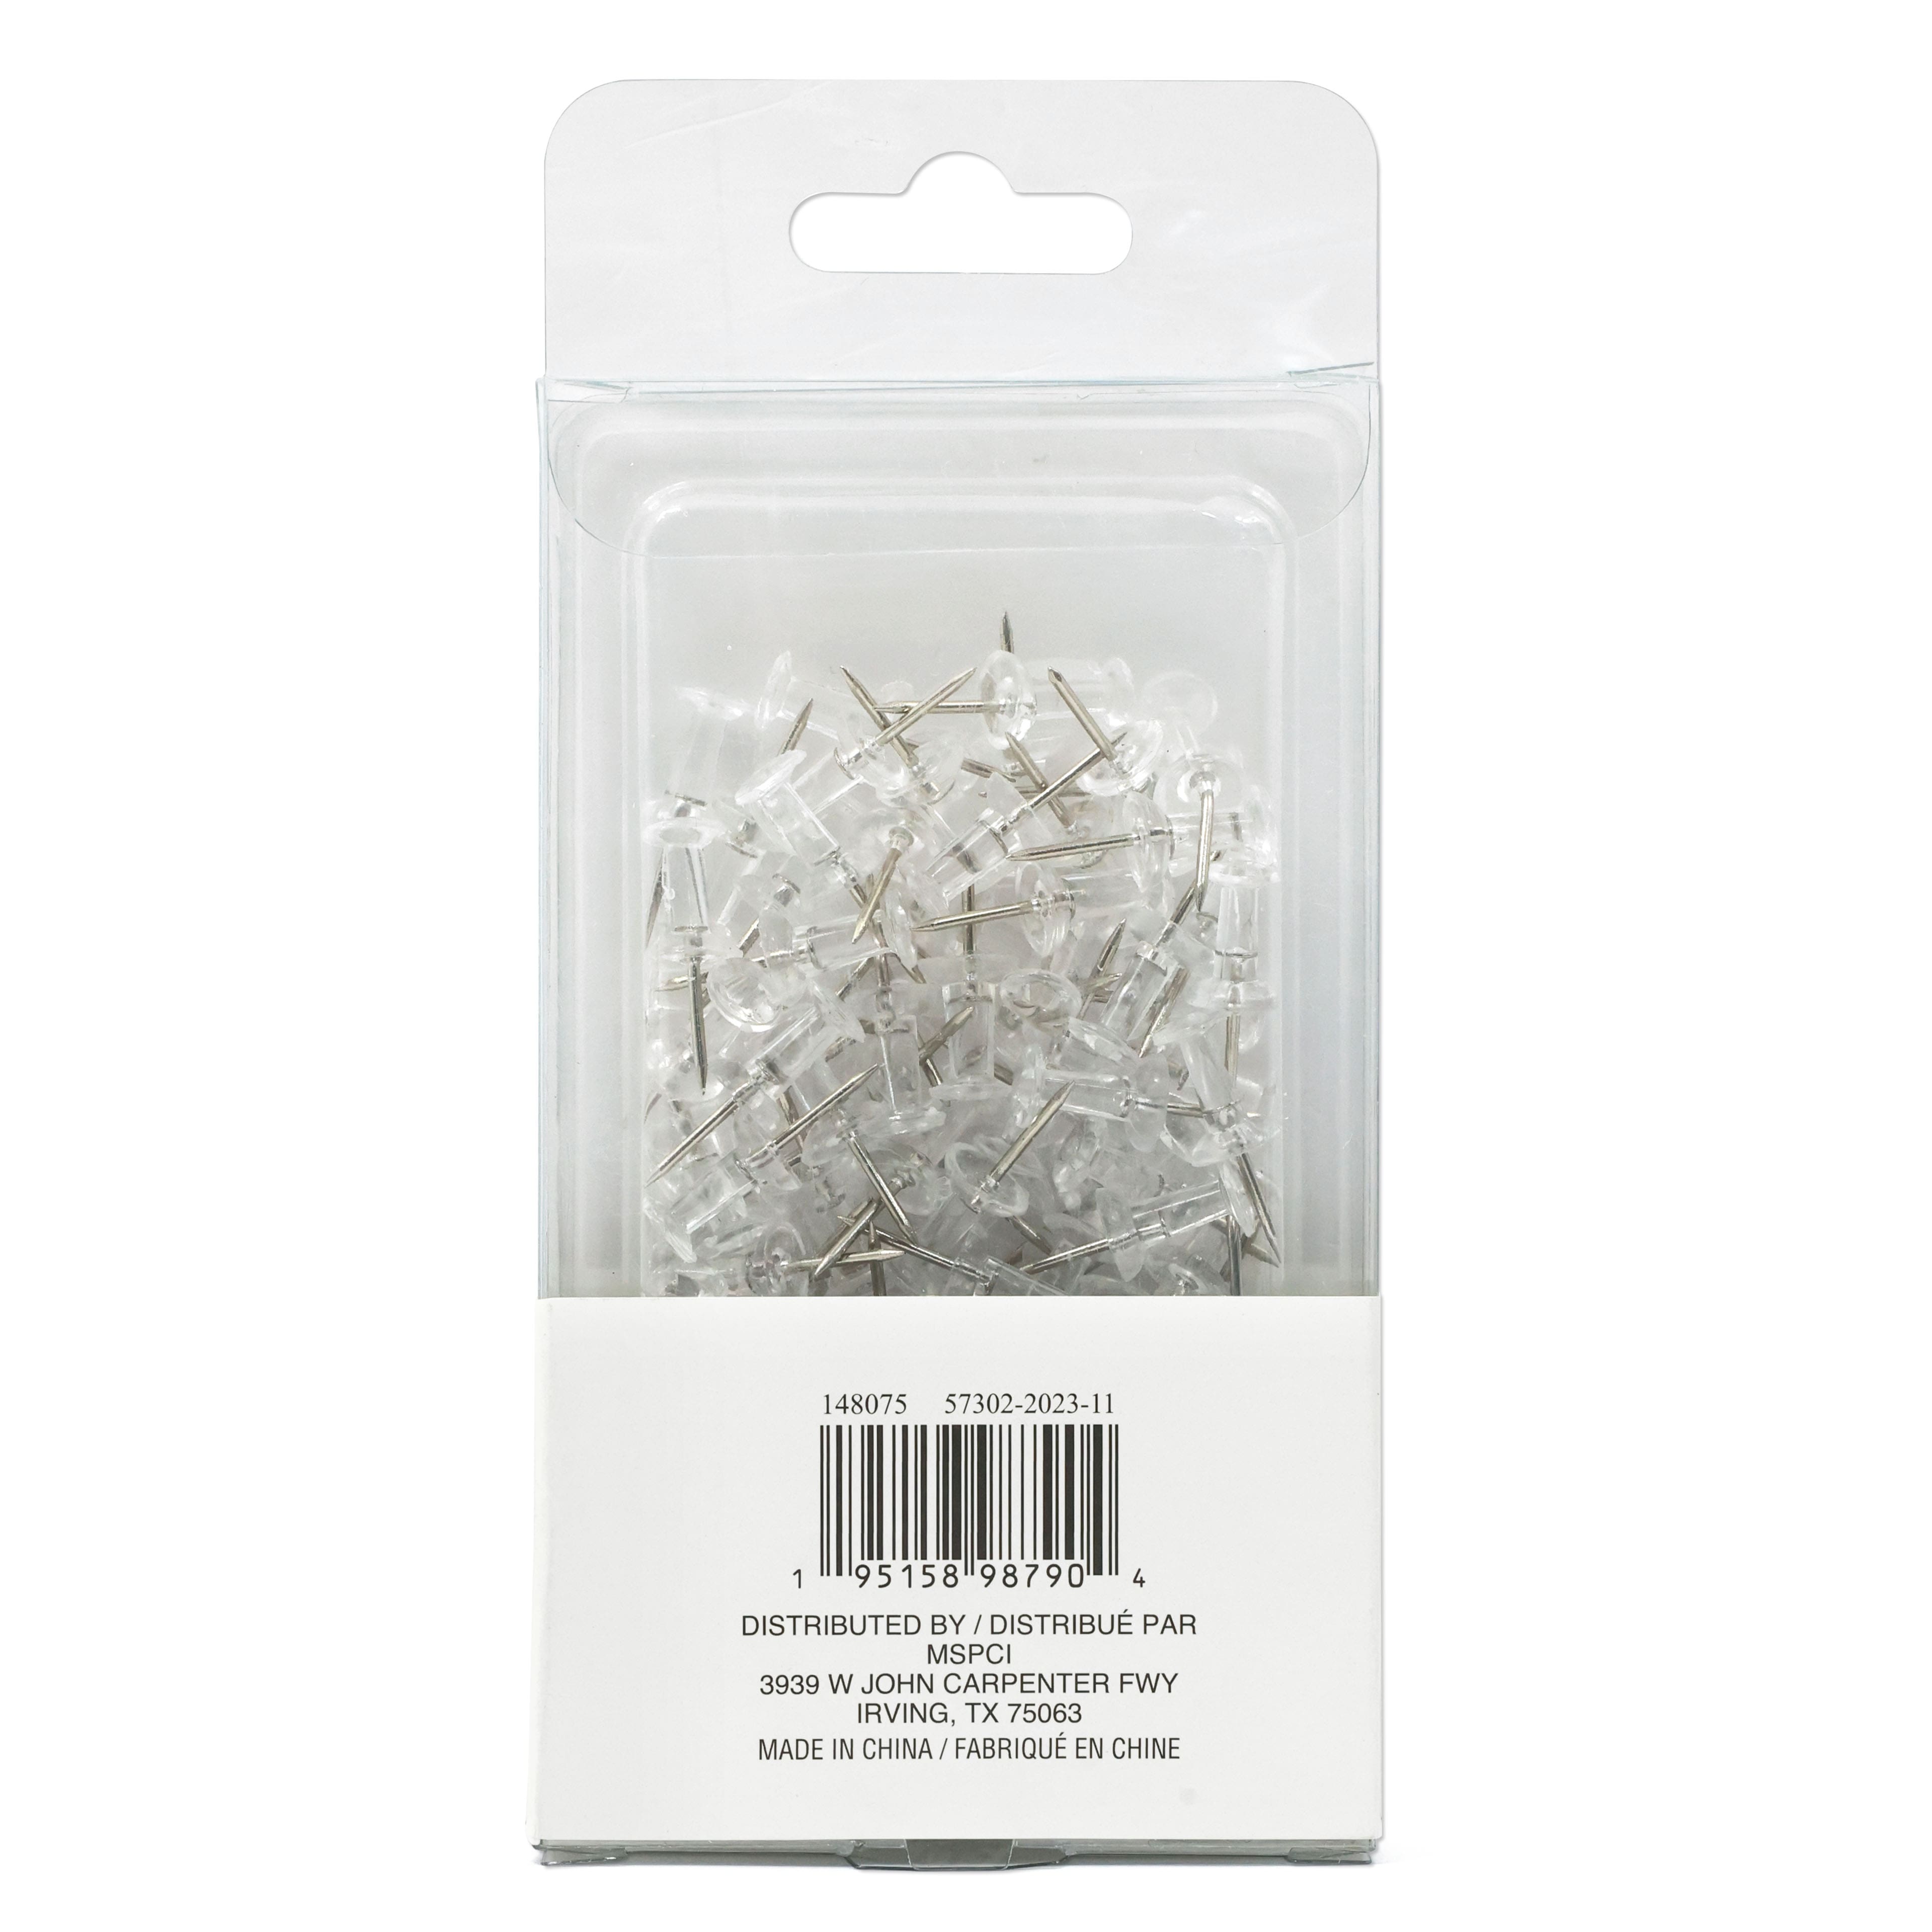 Office Works Push Pins - Clear, 100 pk - Kroger